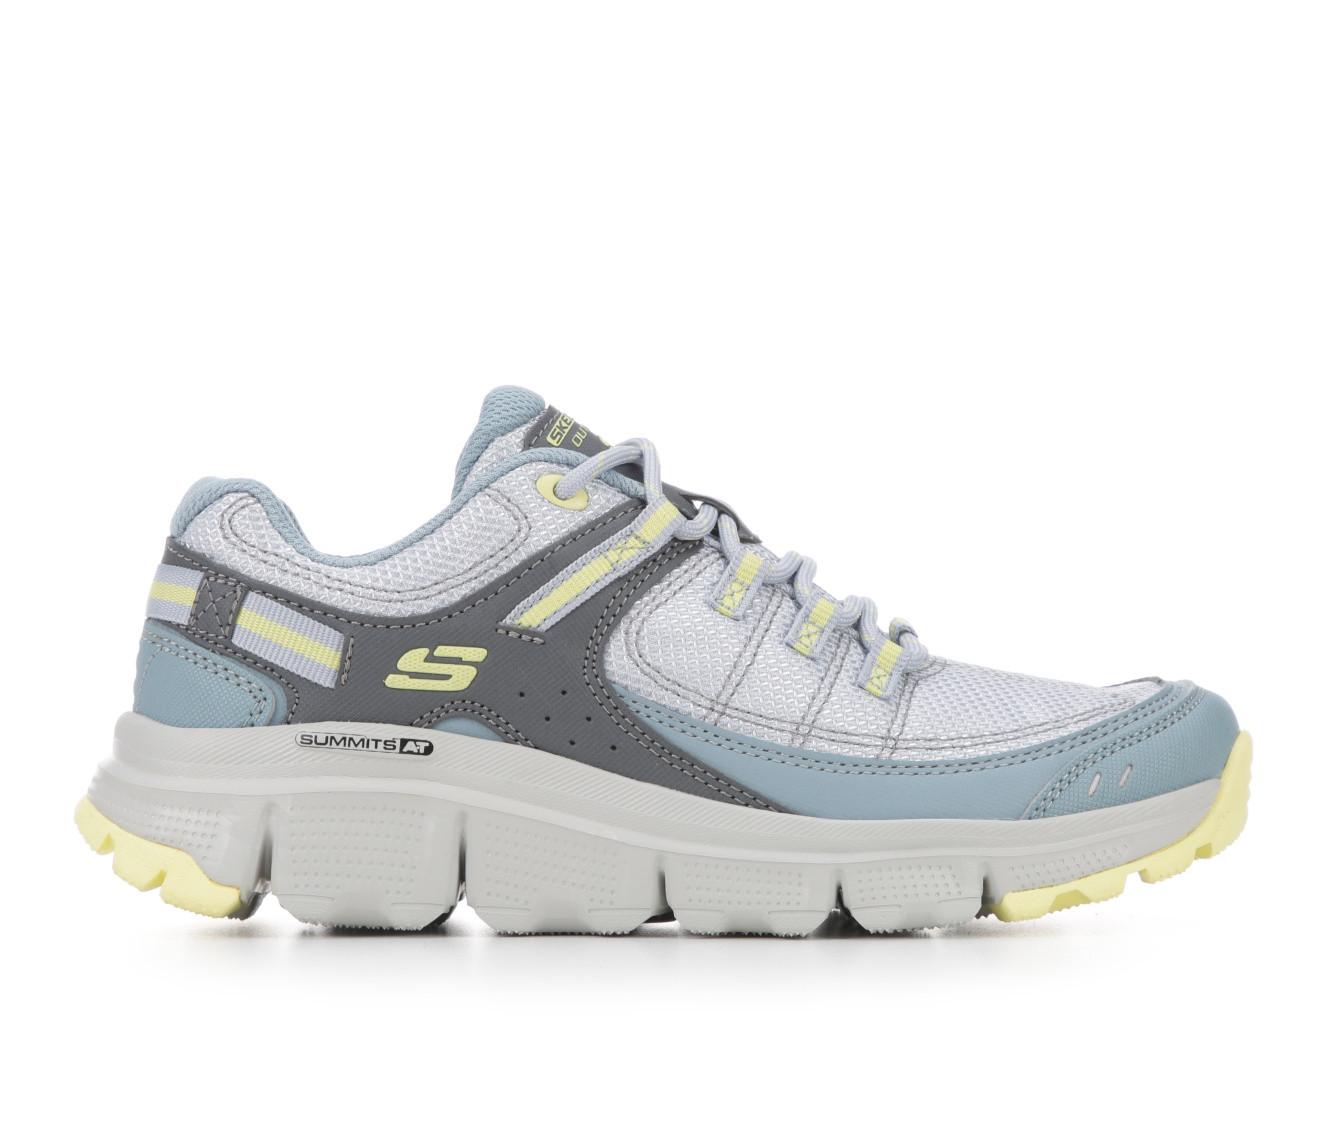 Women's Skechers 180145 Summits AT Trail Running Shoes